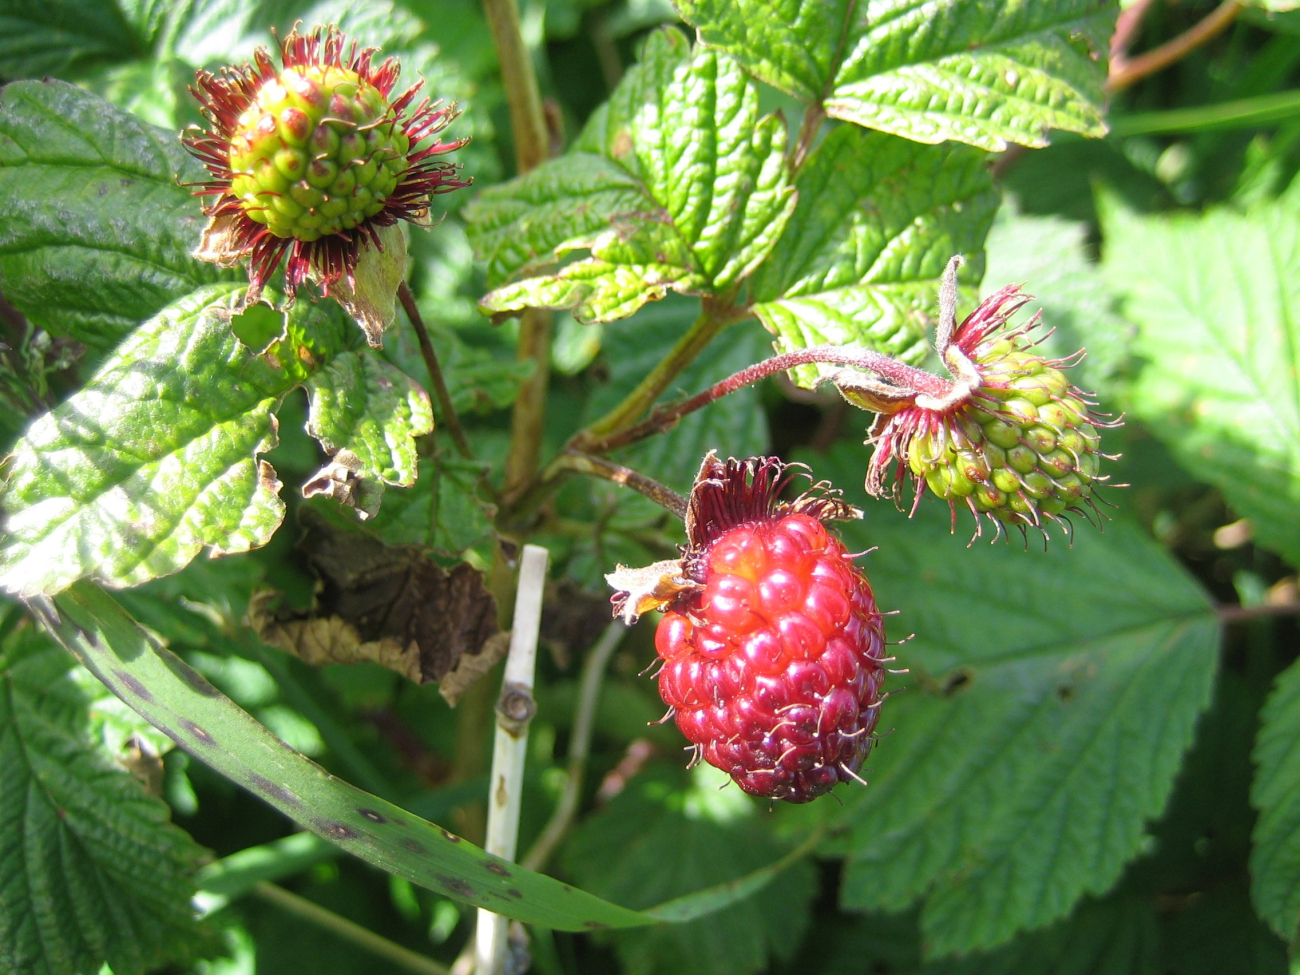 Salmonberry (Rubus spectabilis), an edible berry that is common in southernAlaska